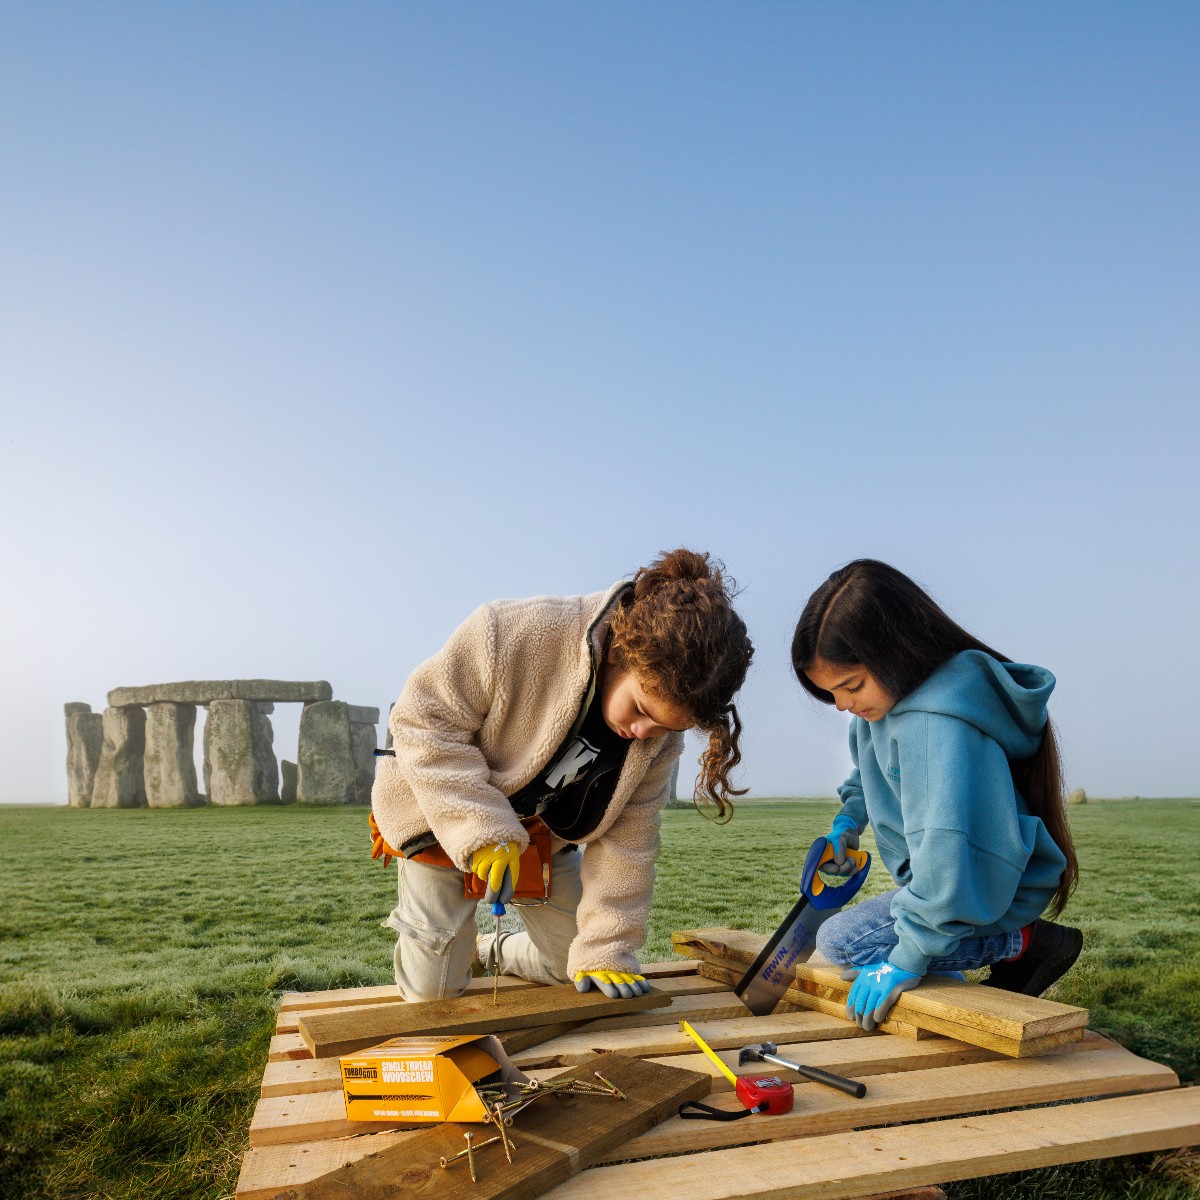 About 5,000 years ago, the builders of Stonehenge worked together to construct an incredible monument. 

Next month, children and their adults are invited to design and build Playhenge – a one-of-a-kind adventure playground! 🤸

Find out more ➡️ bit.ly/Playhenge